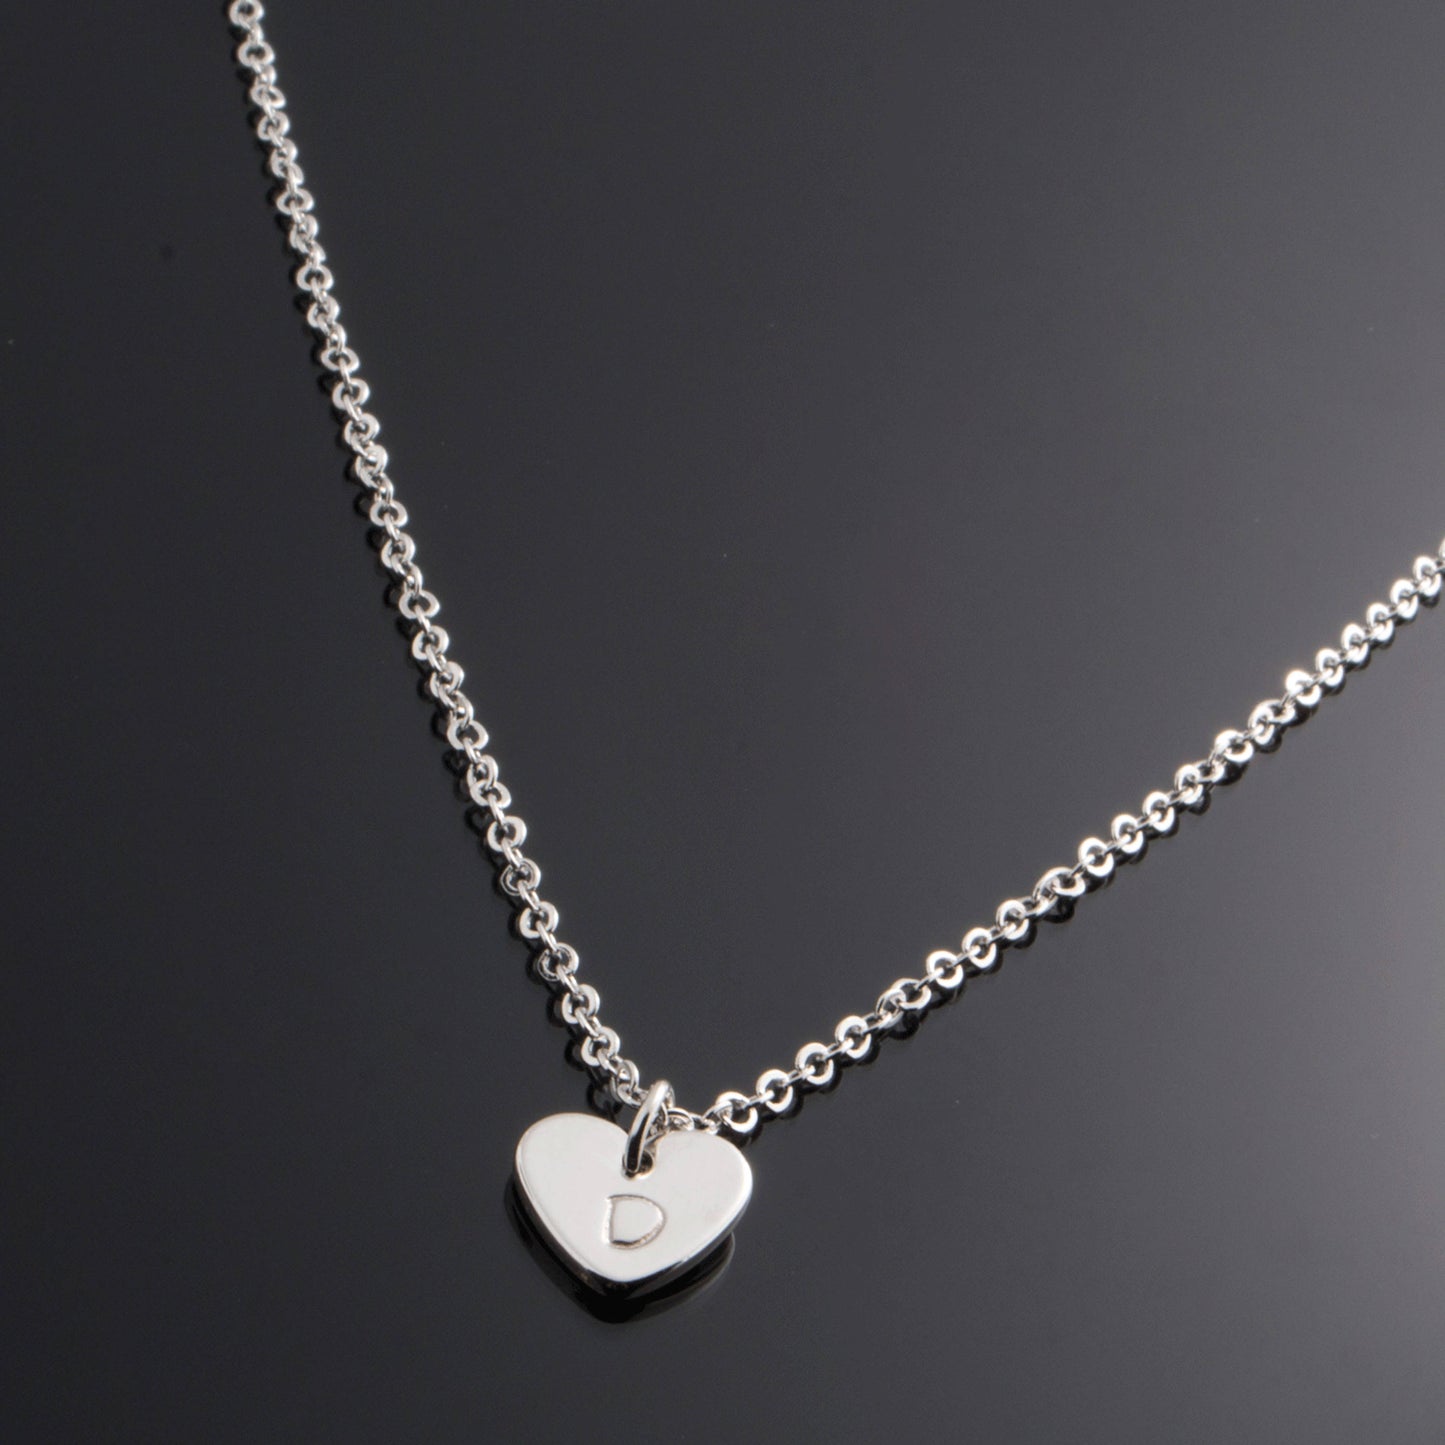 Personalized Lovely Dainty Initial Heart Necklace